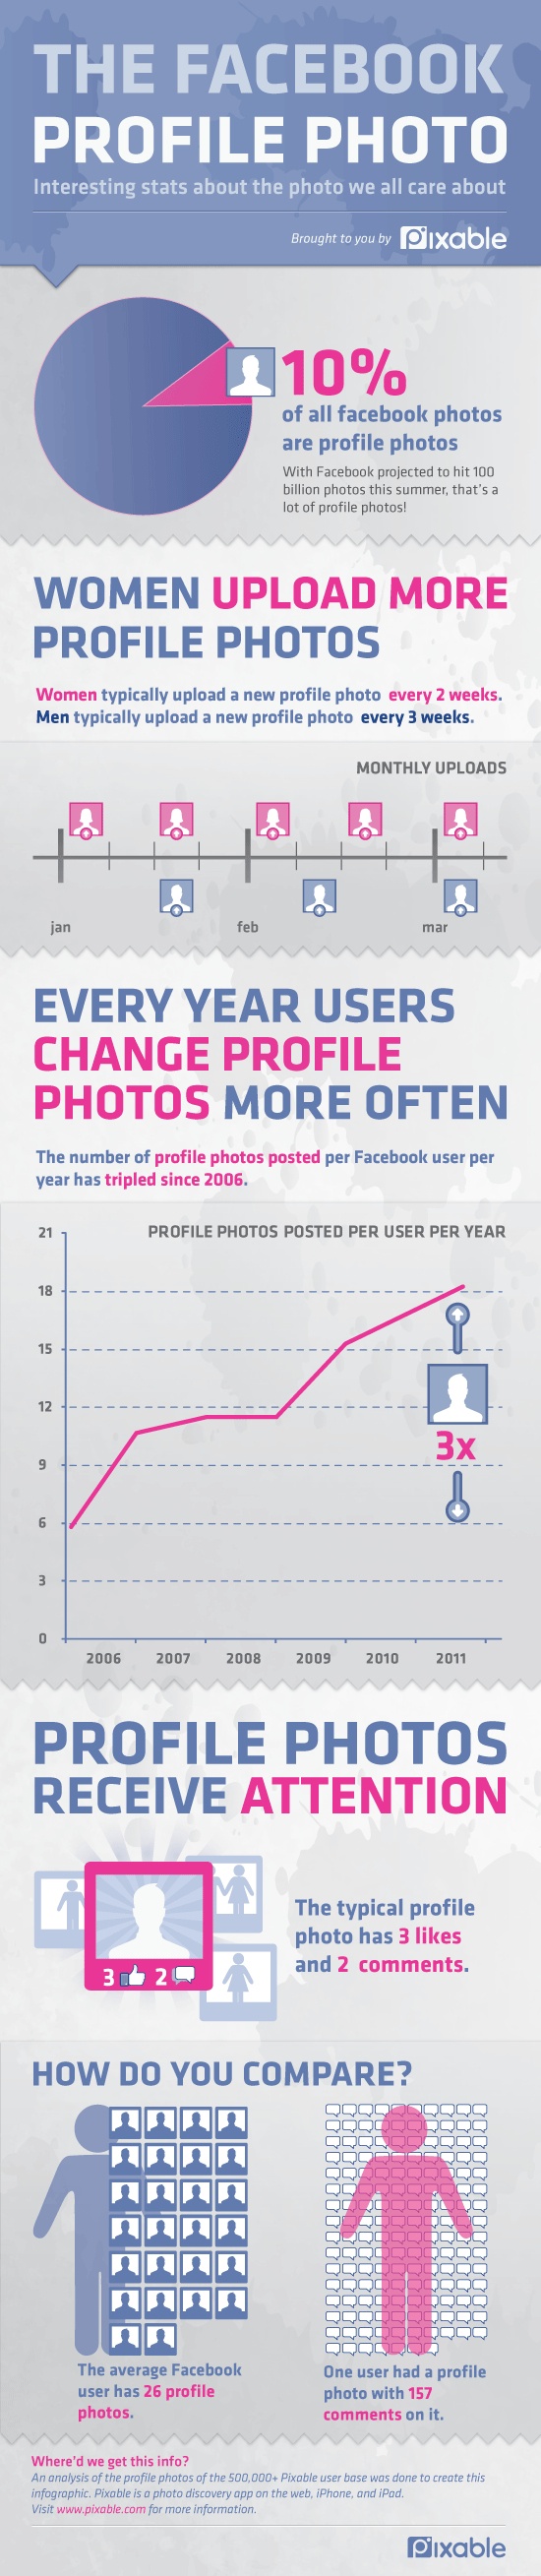 Pixable Facebook infographic